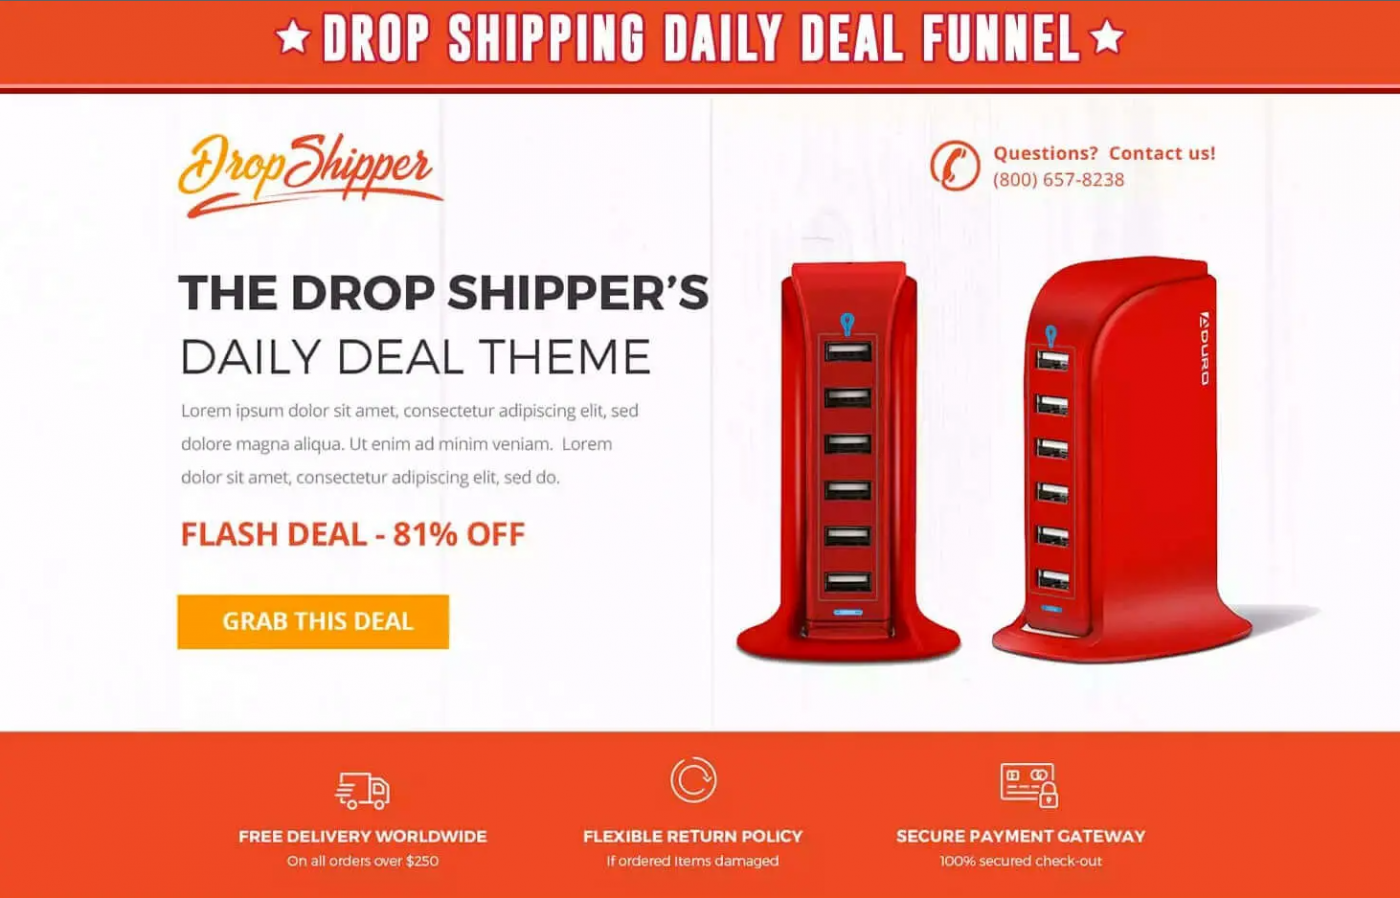 Daily deal funnel template ClickFunnels templates